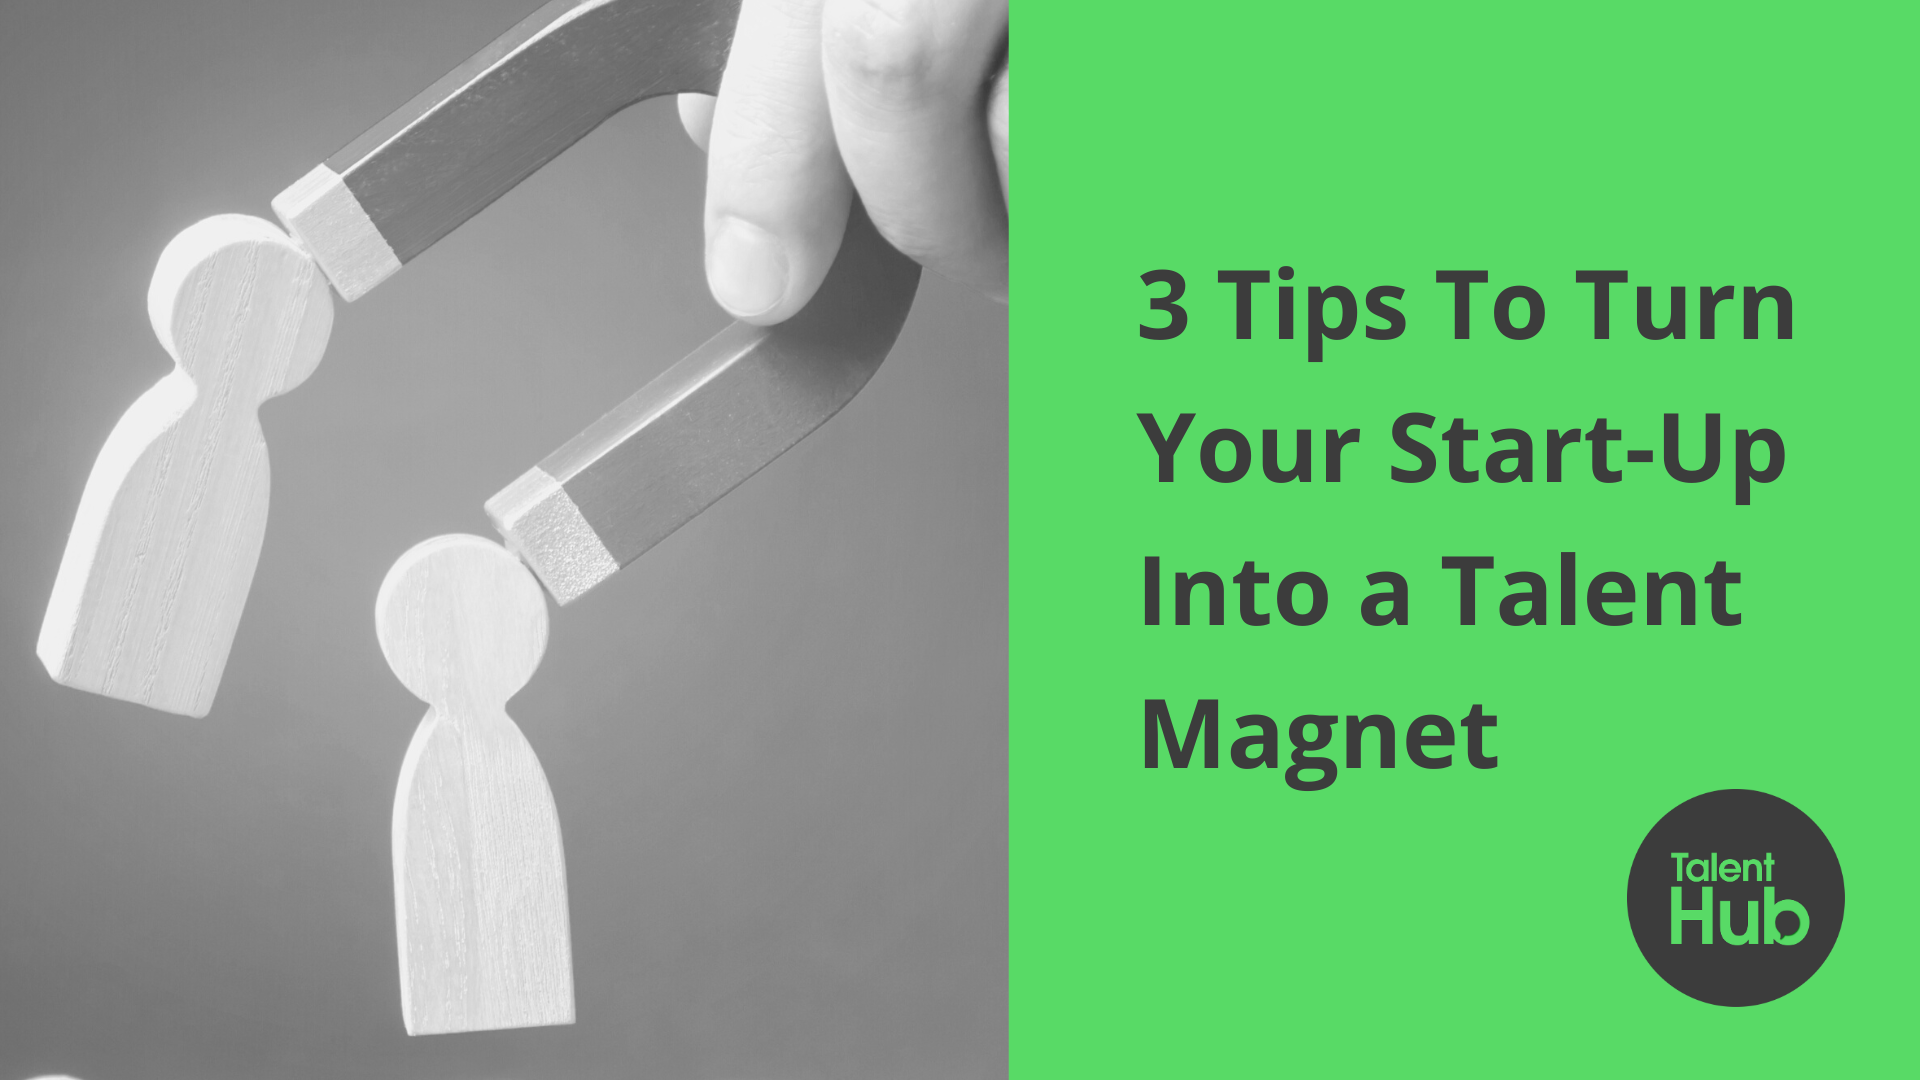 3 Tips To Turn Your Start-Up Into a Talent Magnet